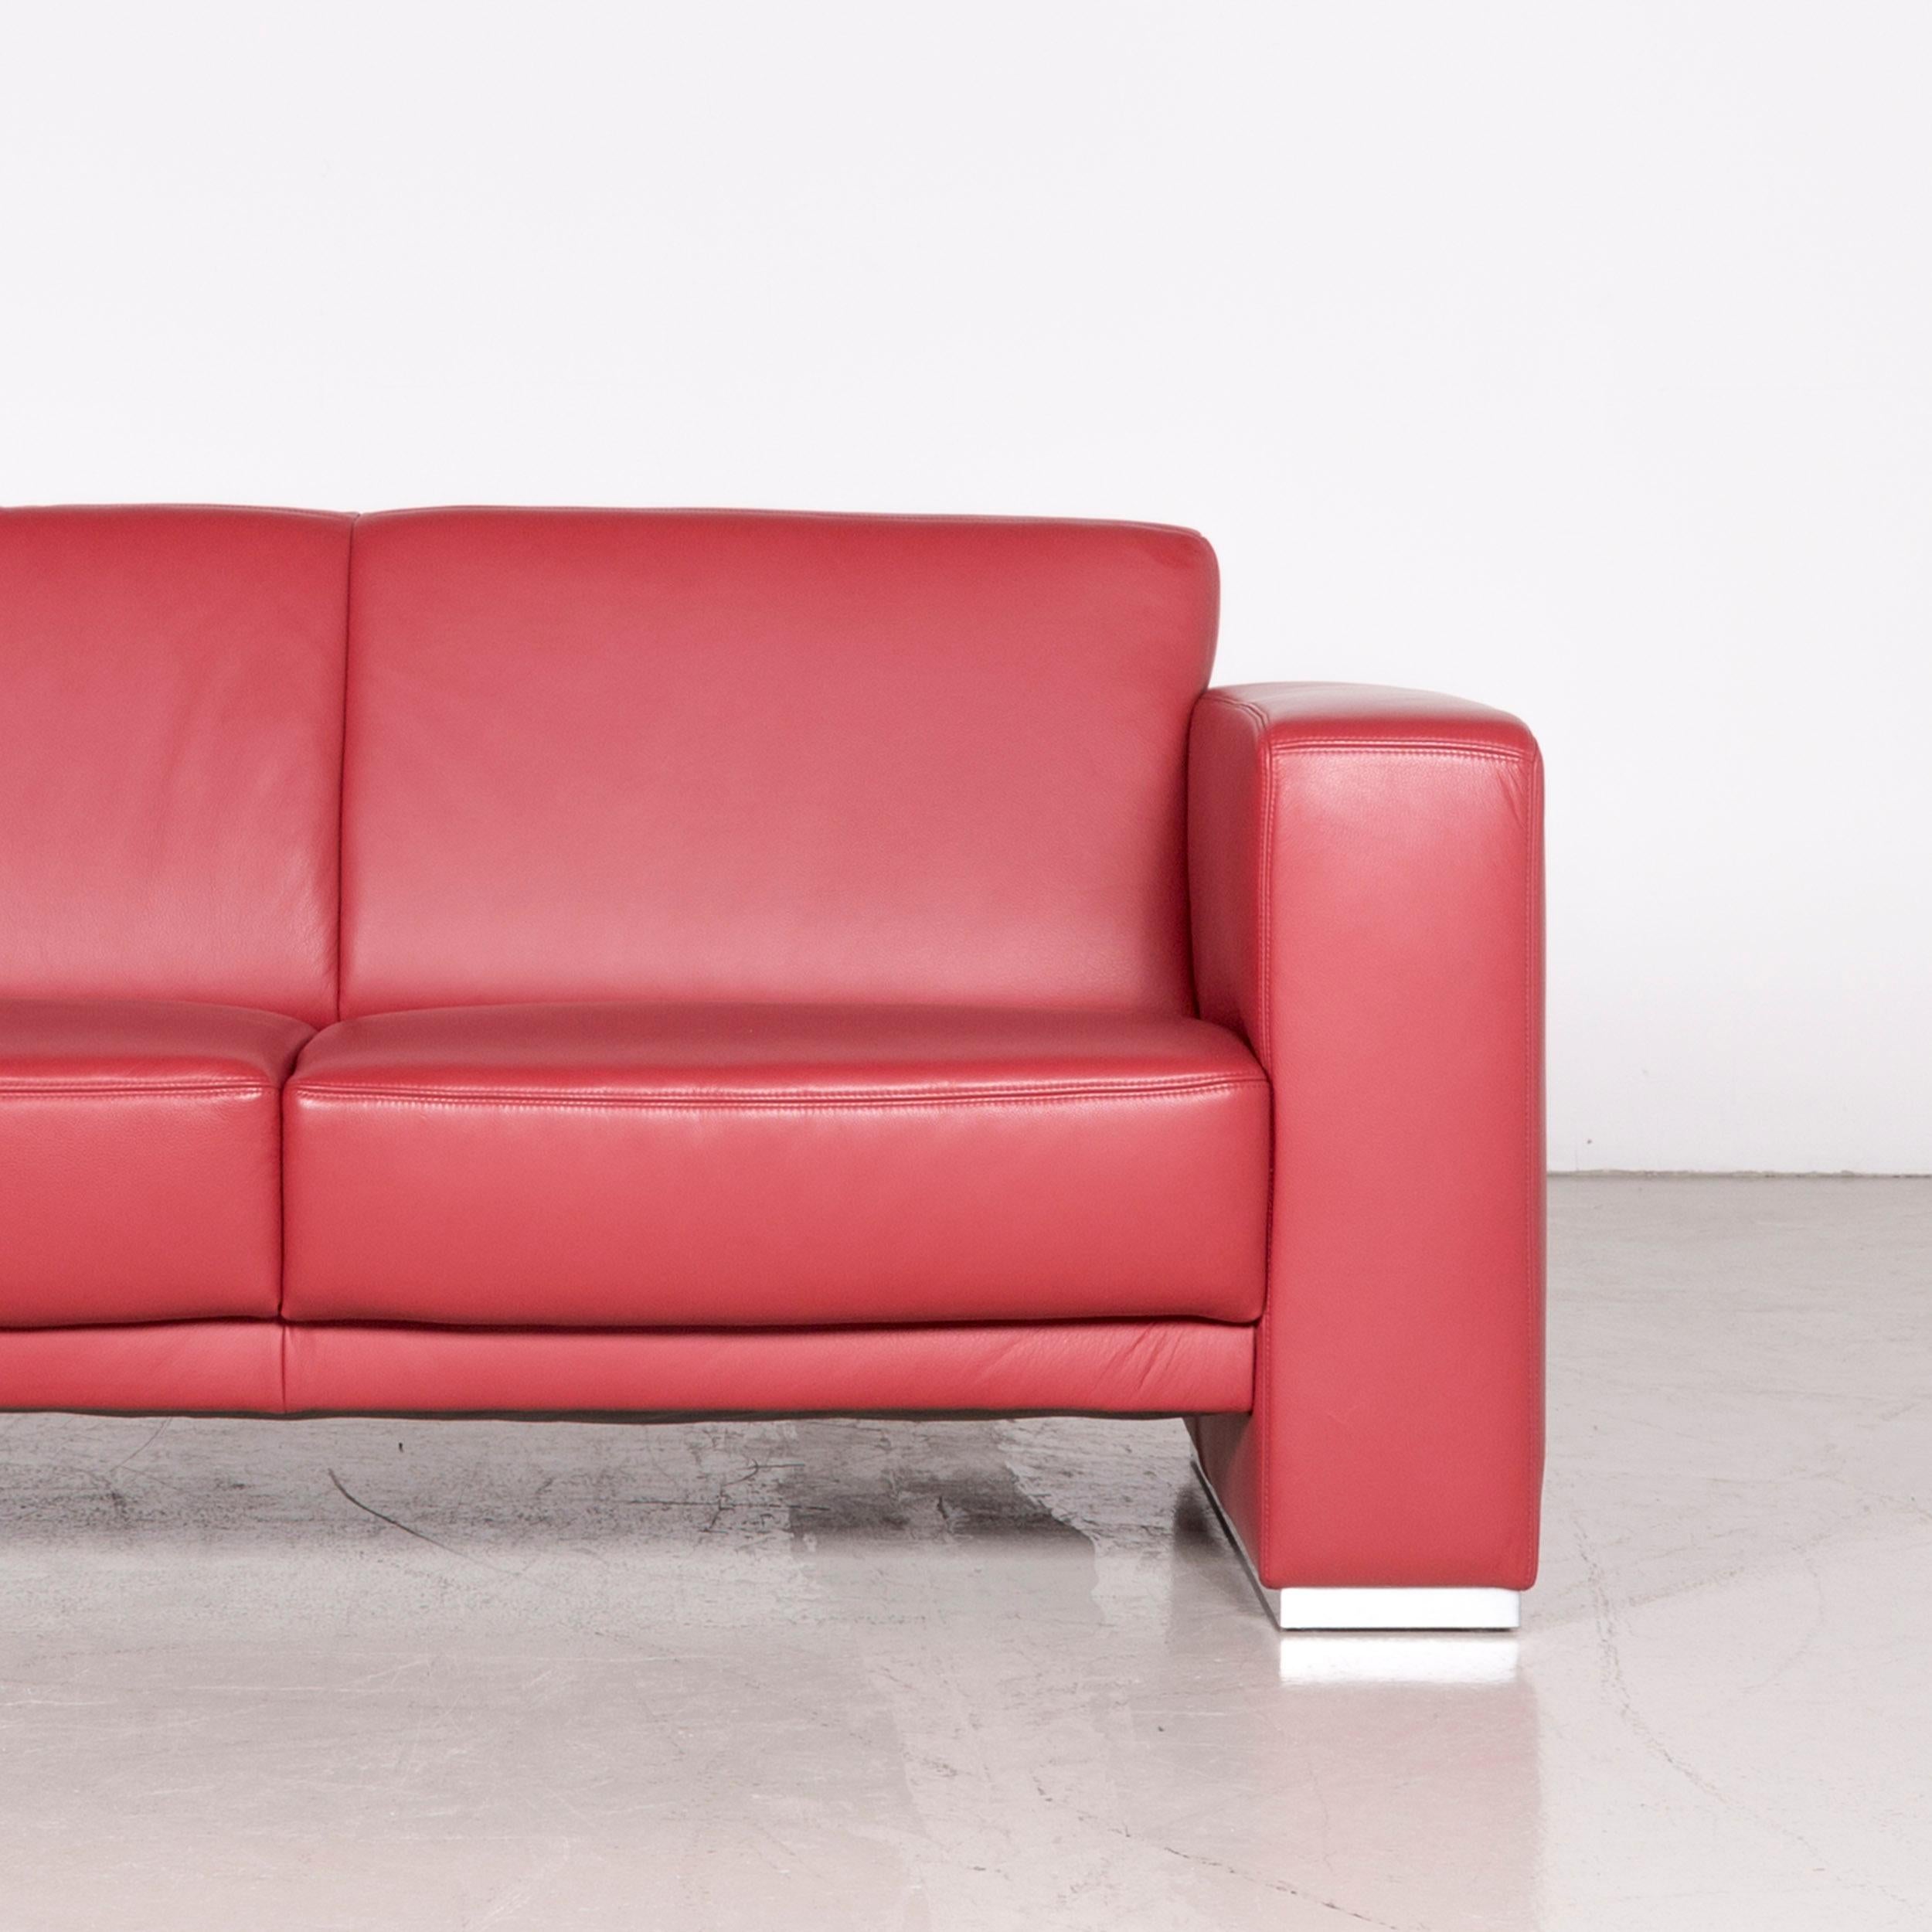 Koinor Nove Designer Leather Sofa Red Two-Seat Couch In Good Condition For Sale In Cologne, DE